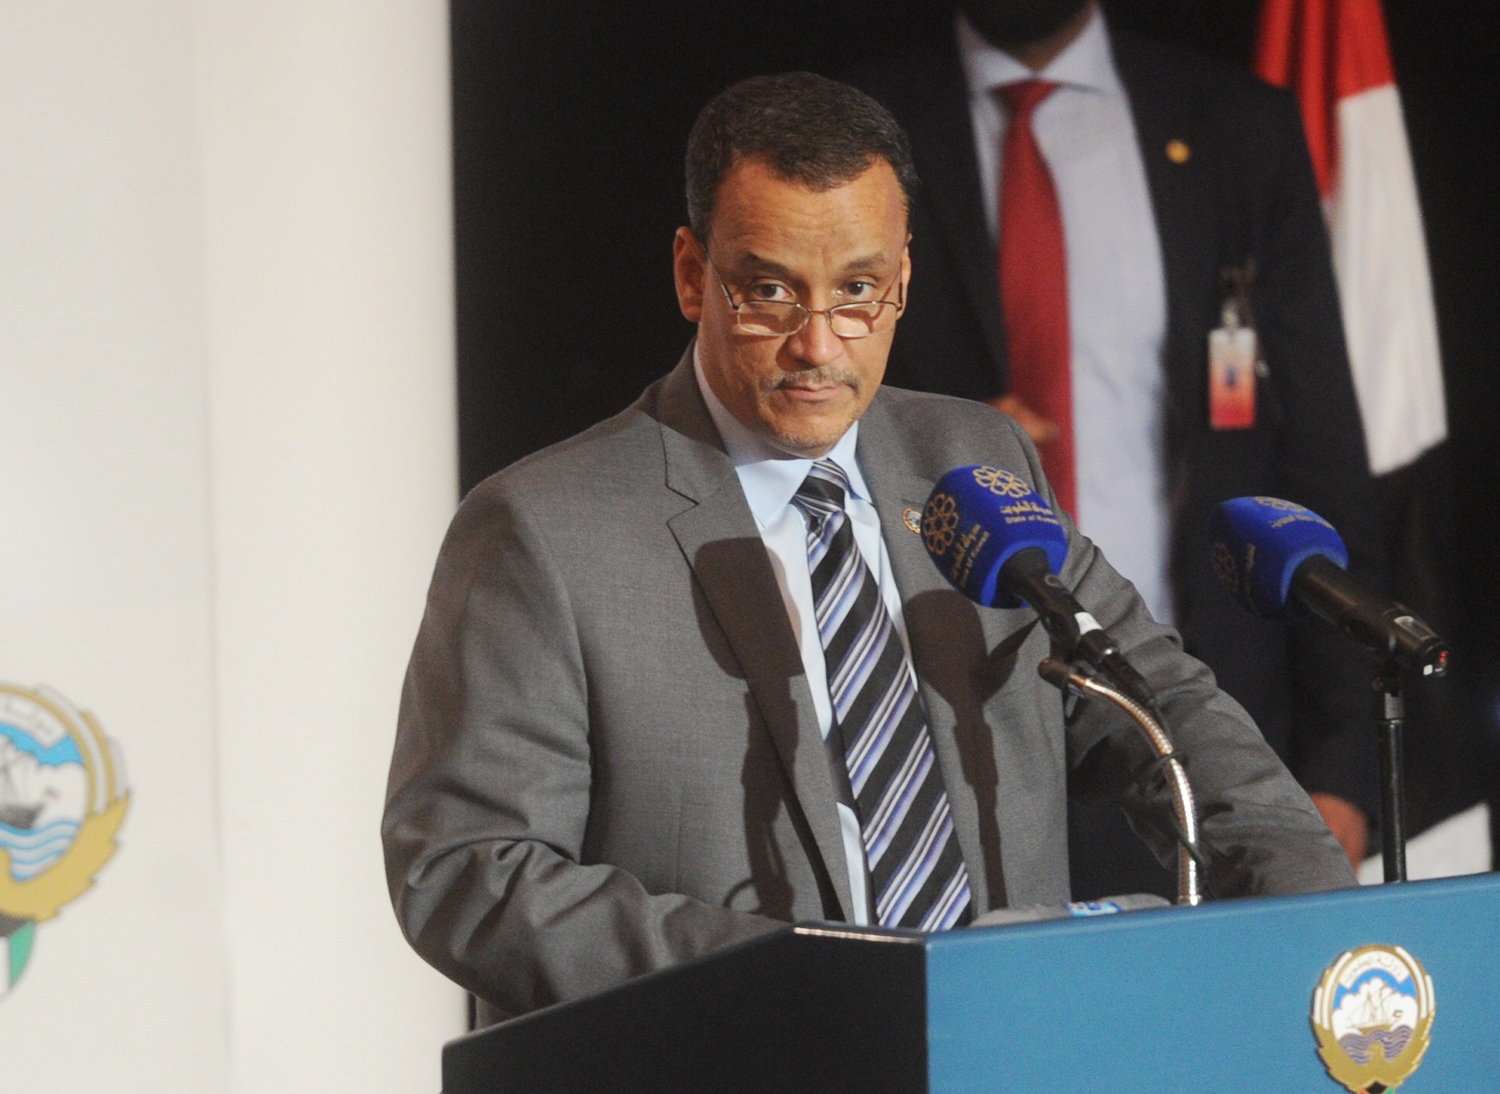 The United Nation's (UN) Special Envoy for Yemen Ismail Ould Cheikh Ahmed during the press conference